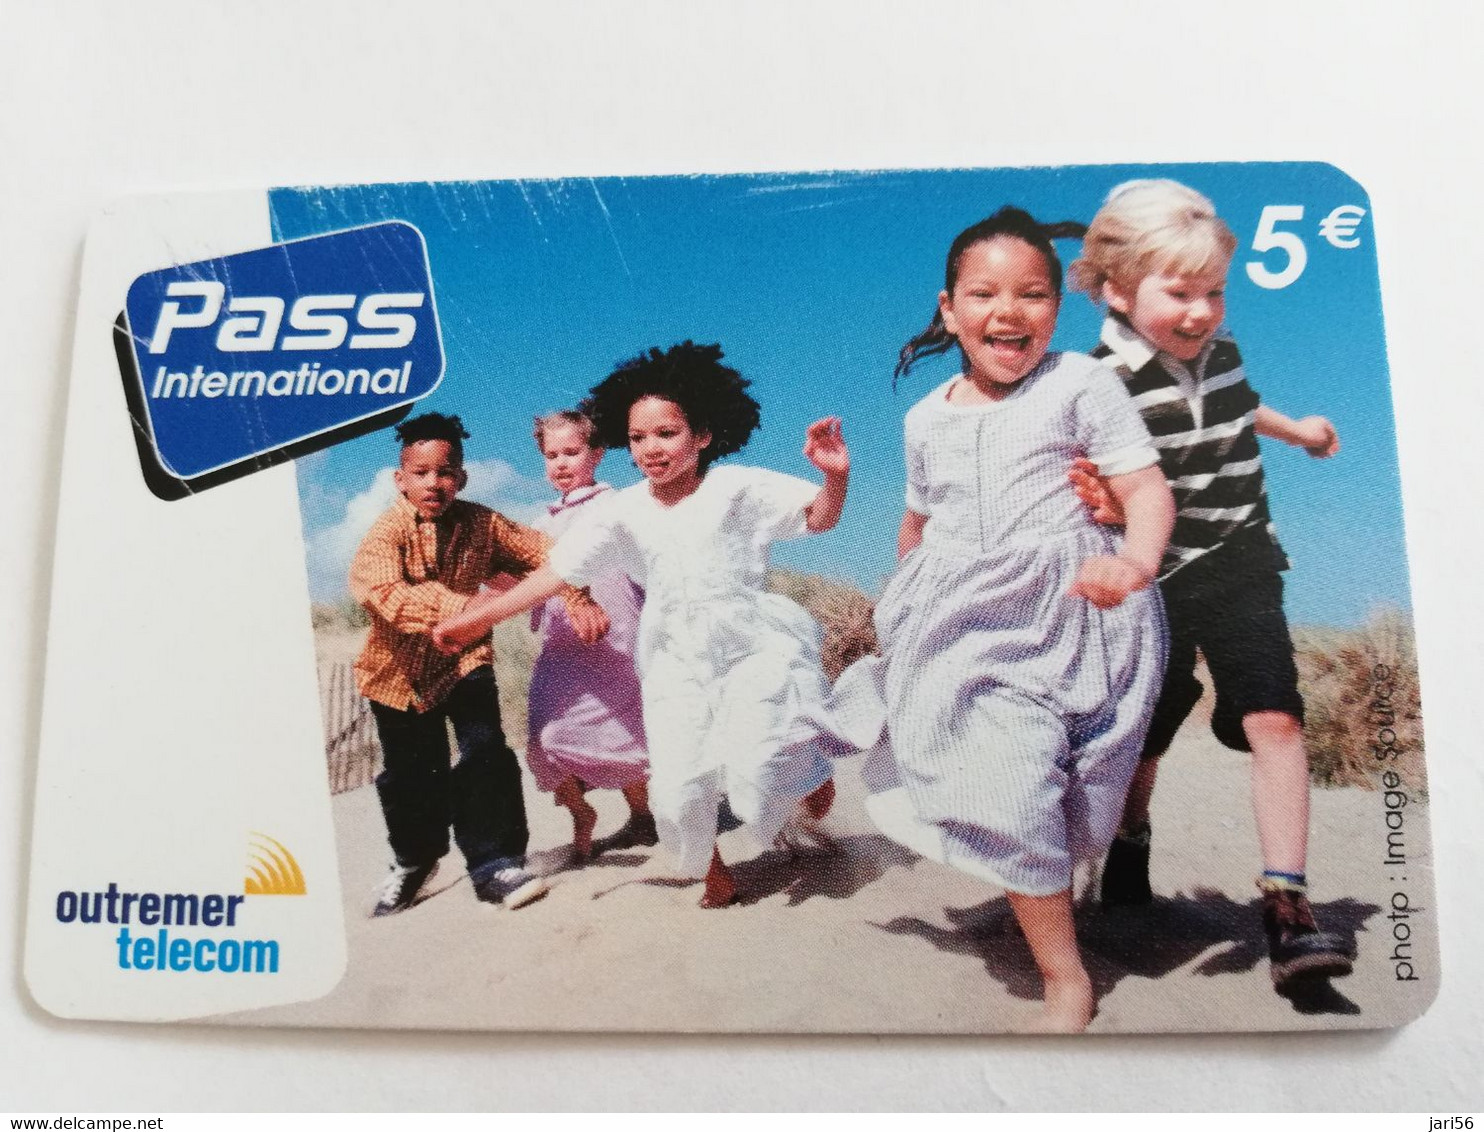 Phonecard St Martin French OUTREMER TELECOM   PASS Telecom  PLAYING CHILDREN  5 EURO  ** 9626 ** - Antilles (French)